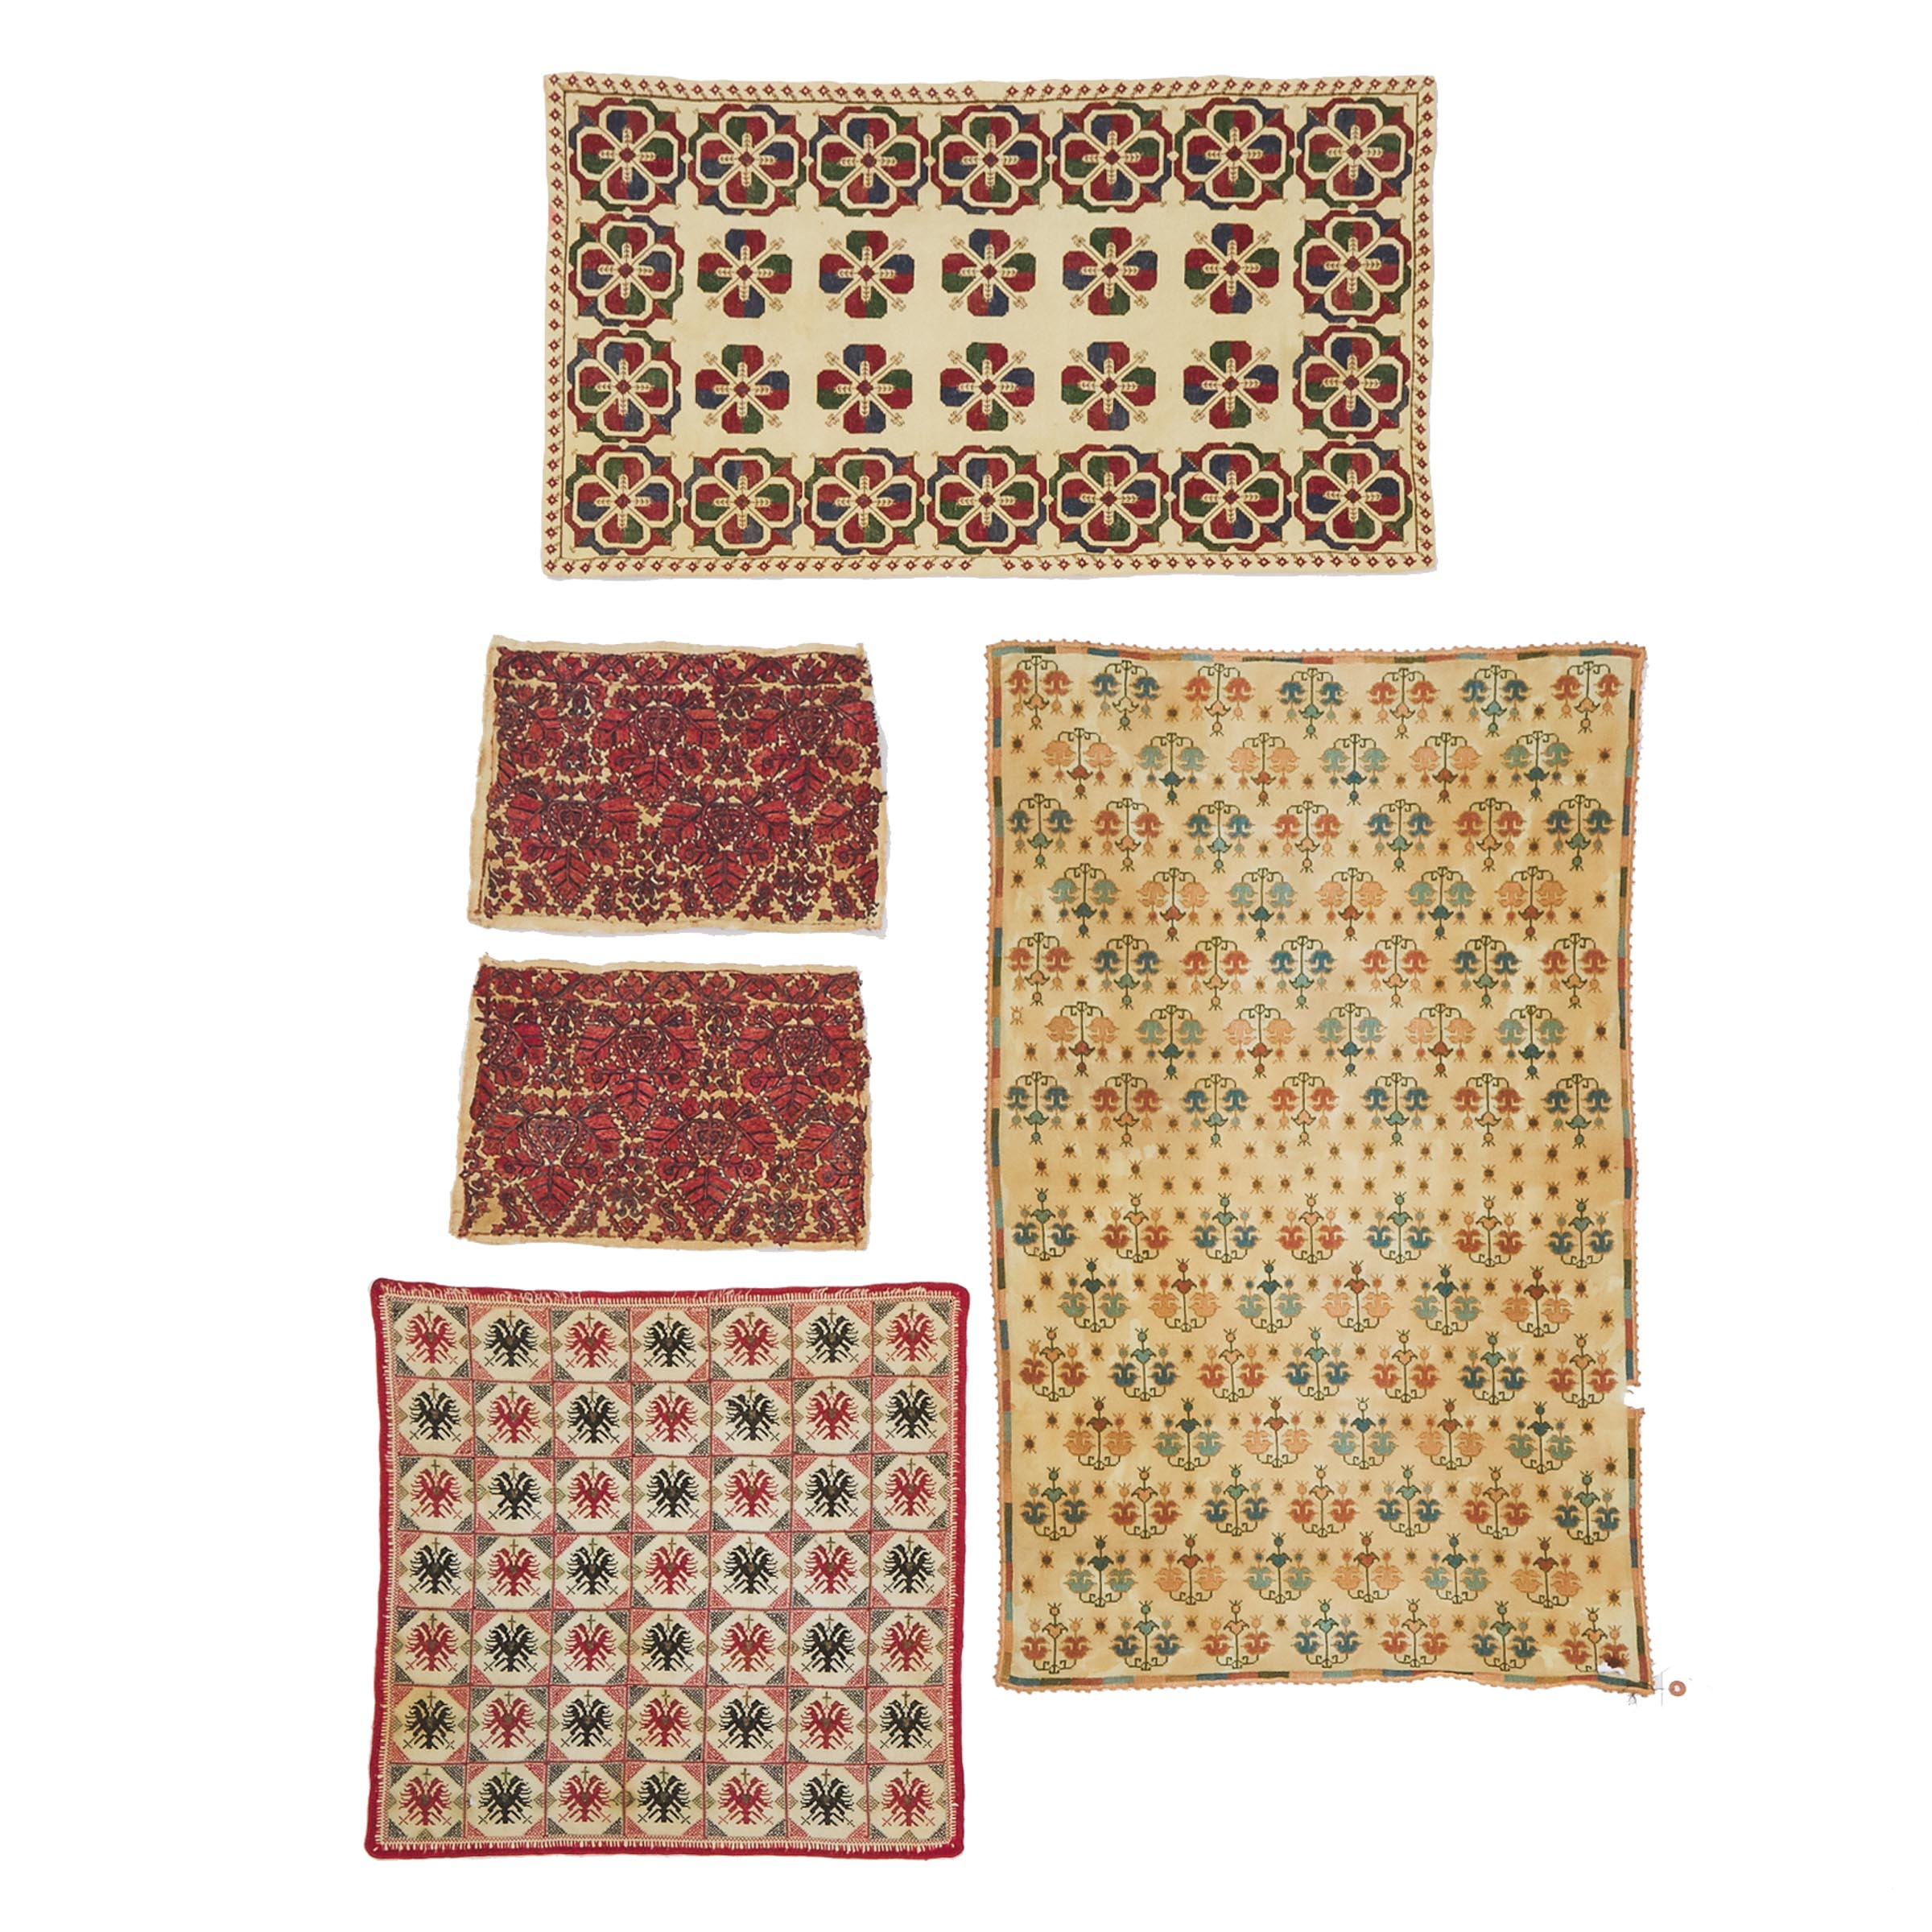 Group of Five Greek Embroideries, c.1910/20